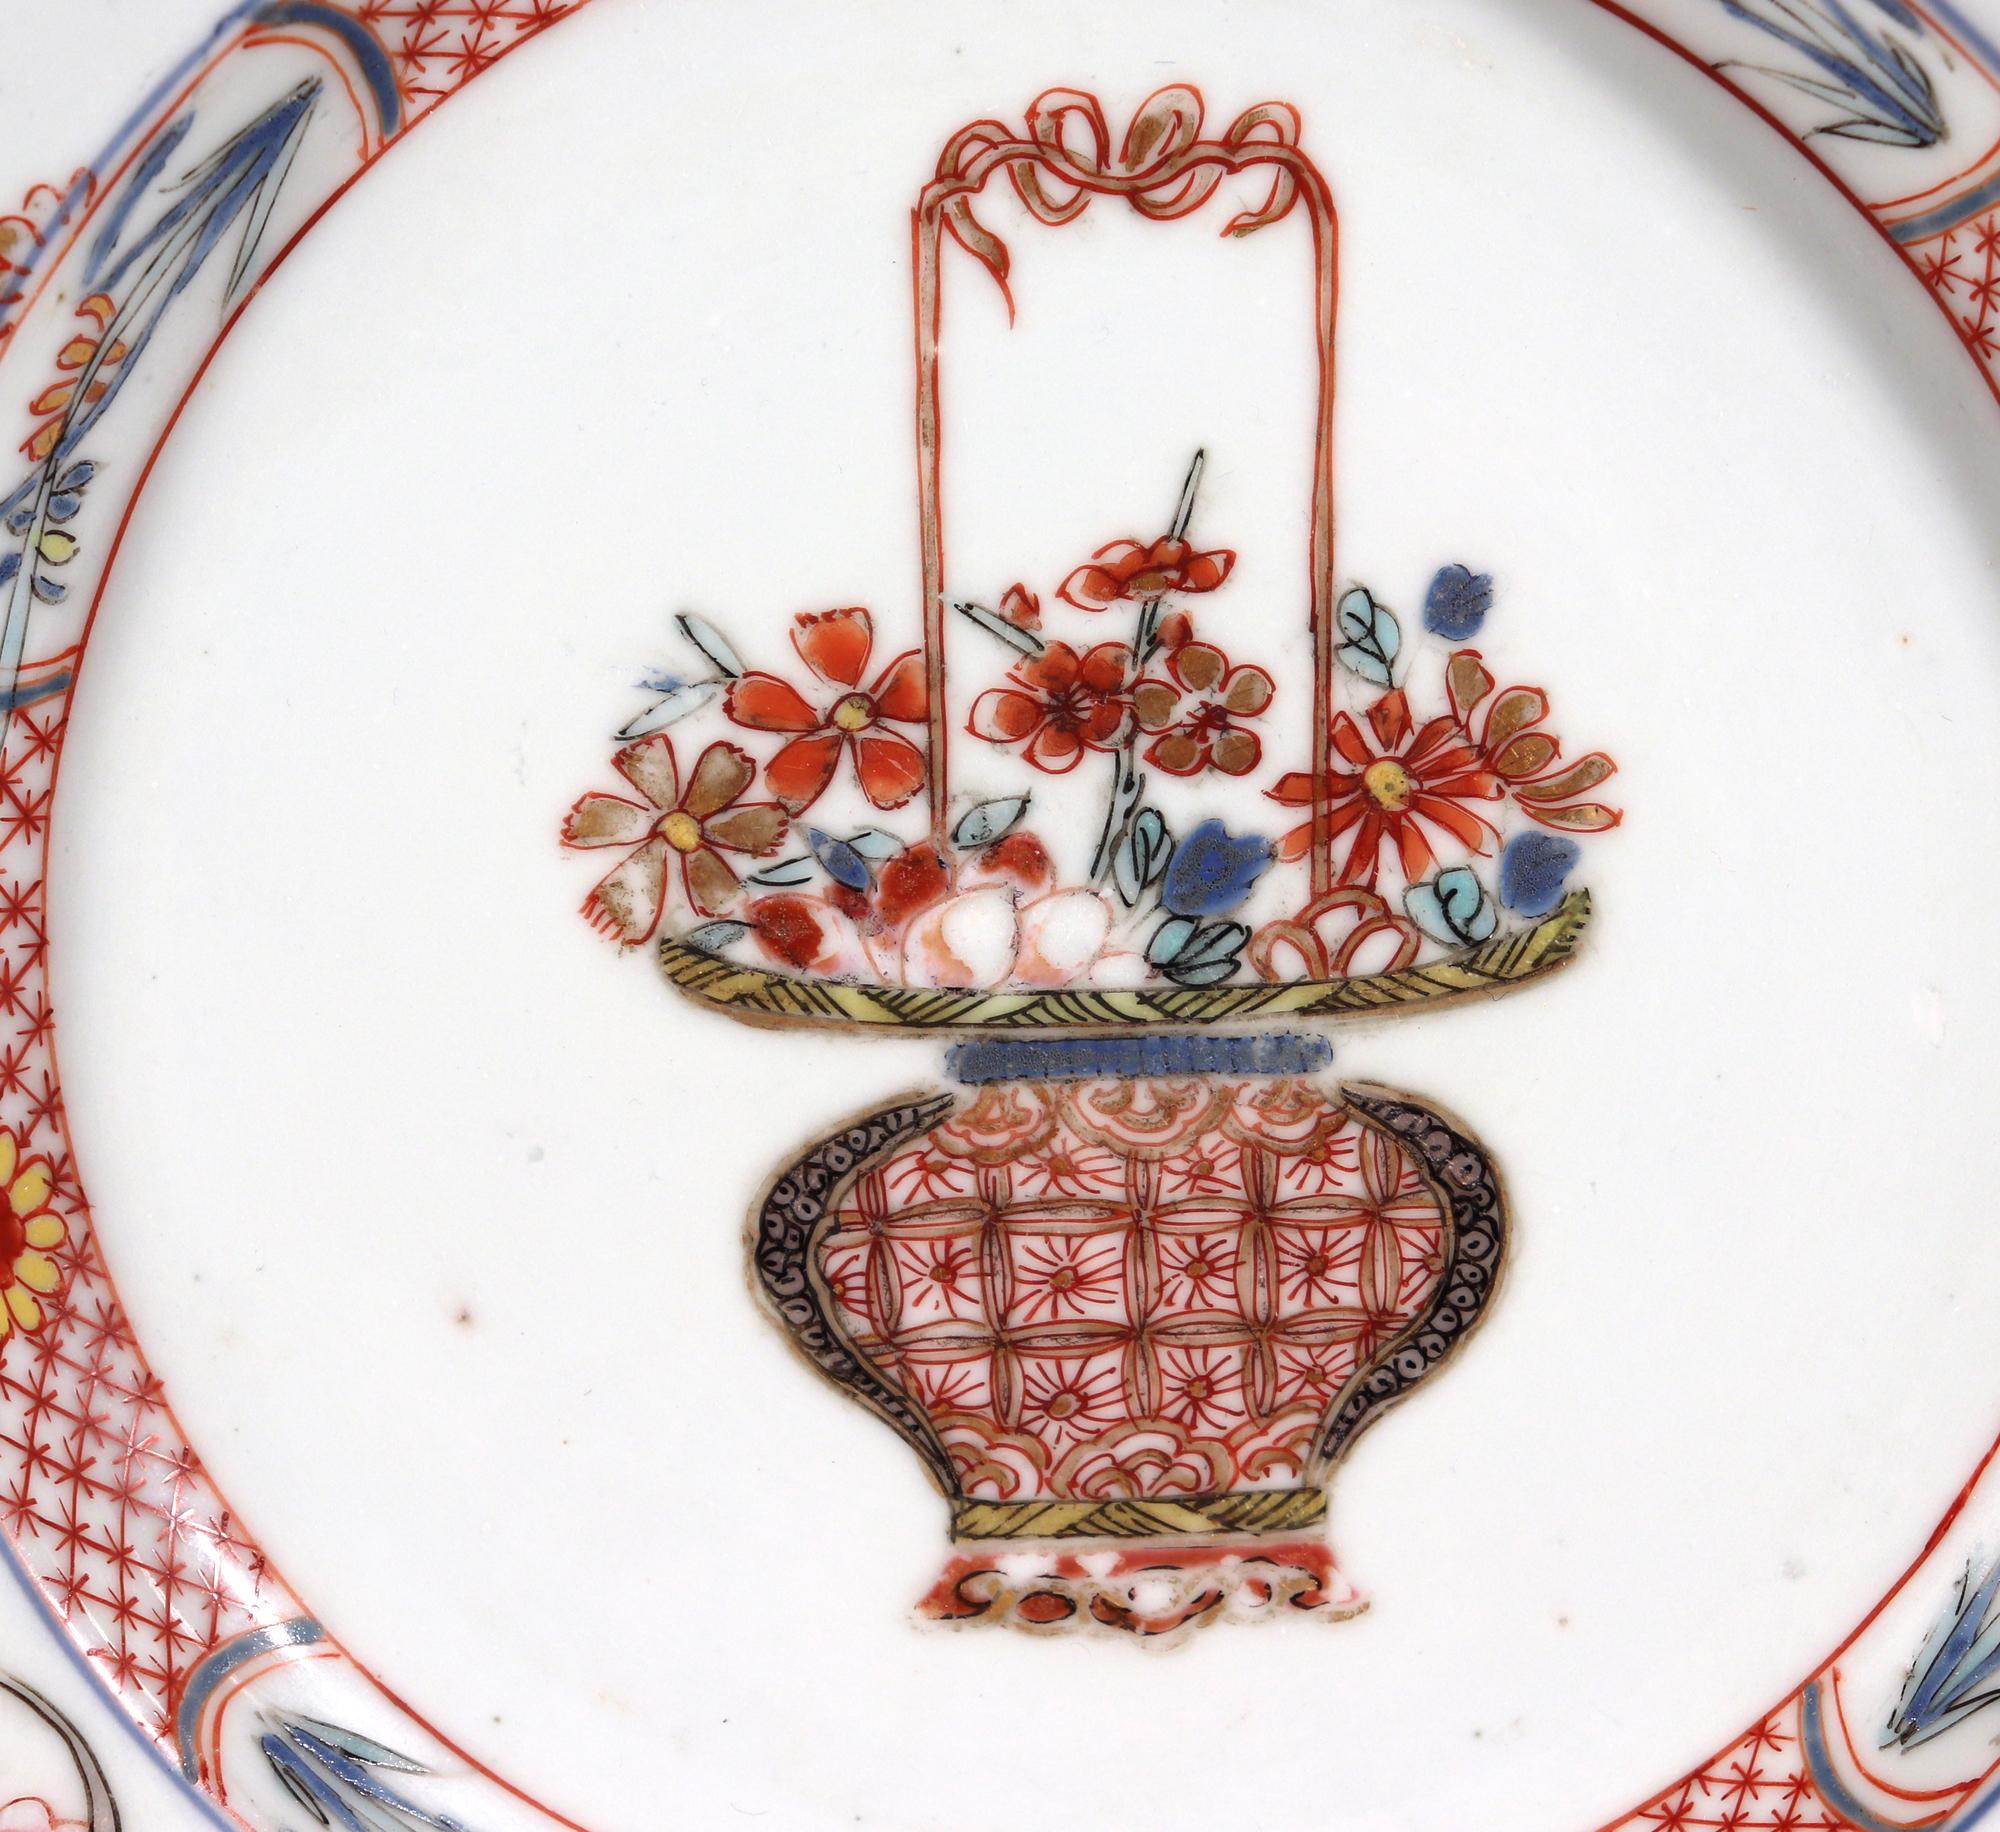 Chinese Export Porcelain Famille Rose-Verte Plates Painted with A Flower Basket For Sale 2